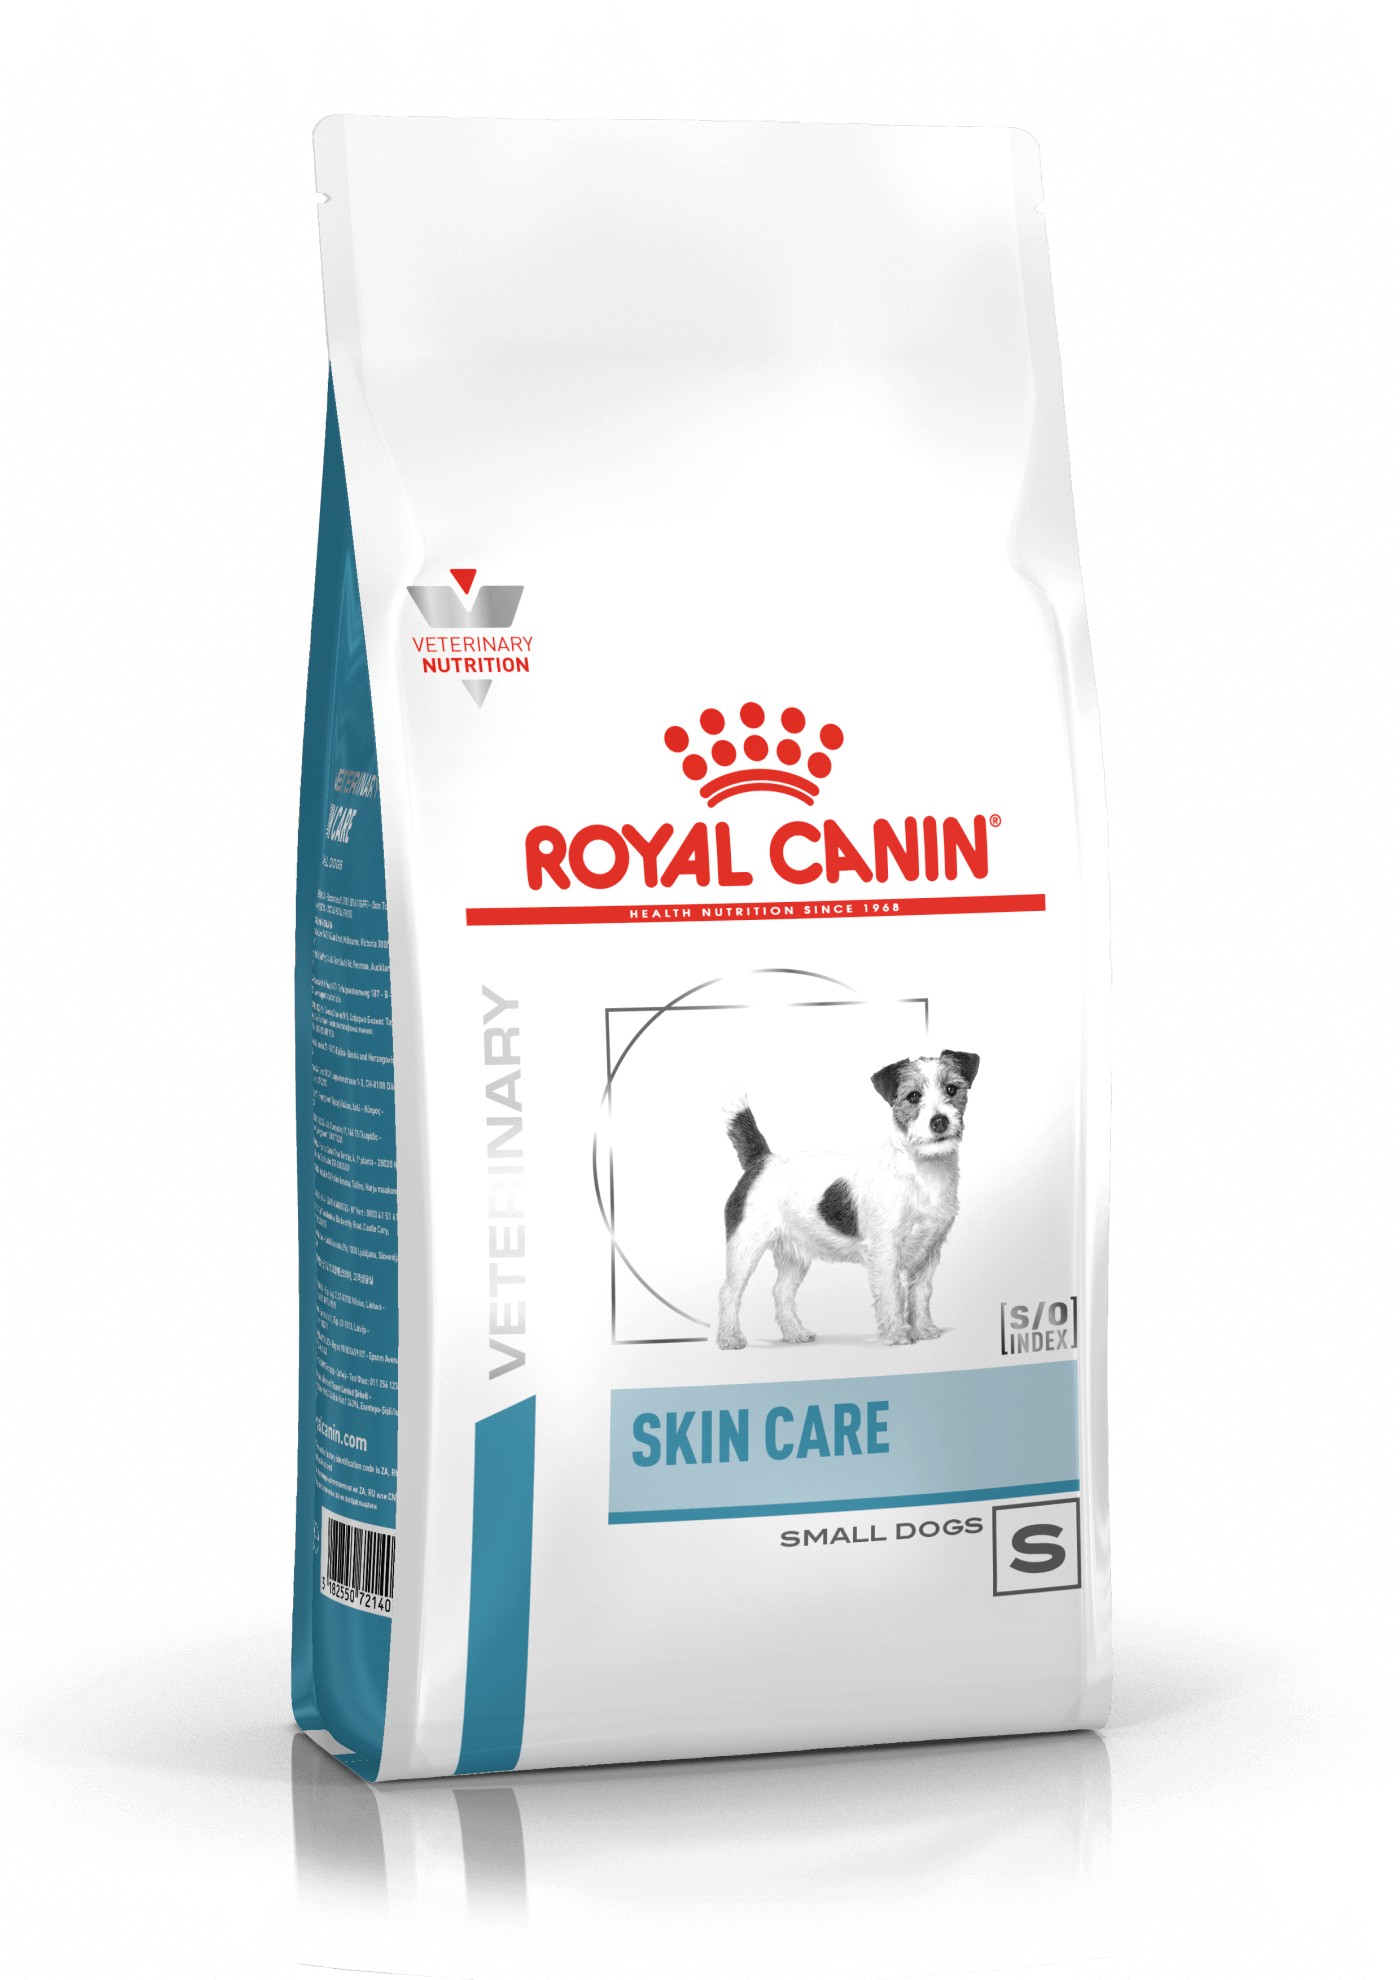 Royal Canin Veterinary Skin Care Small Dogs hundfoder